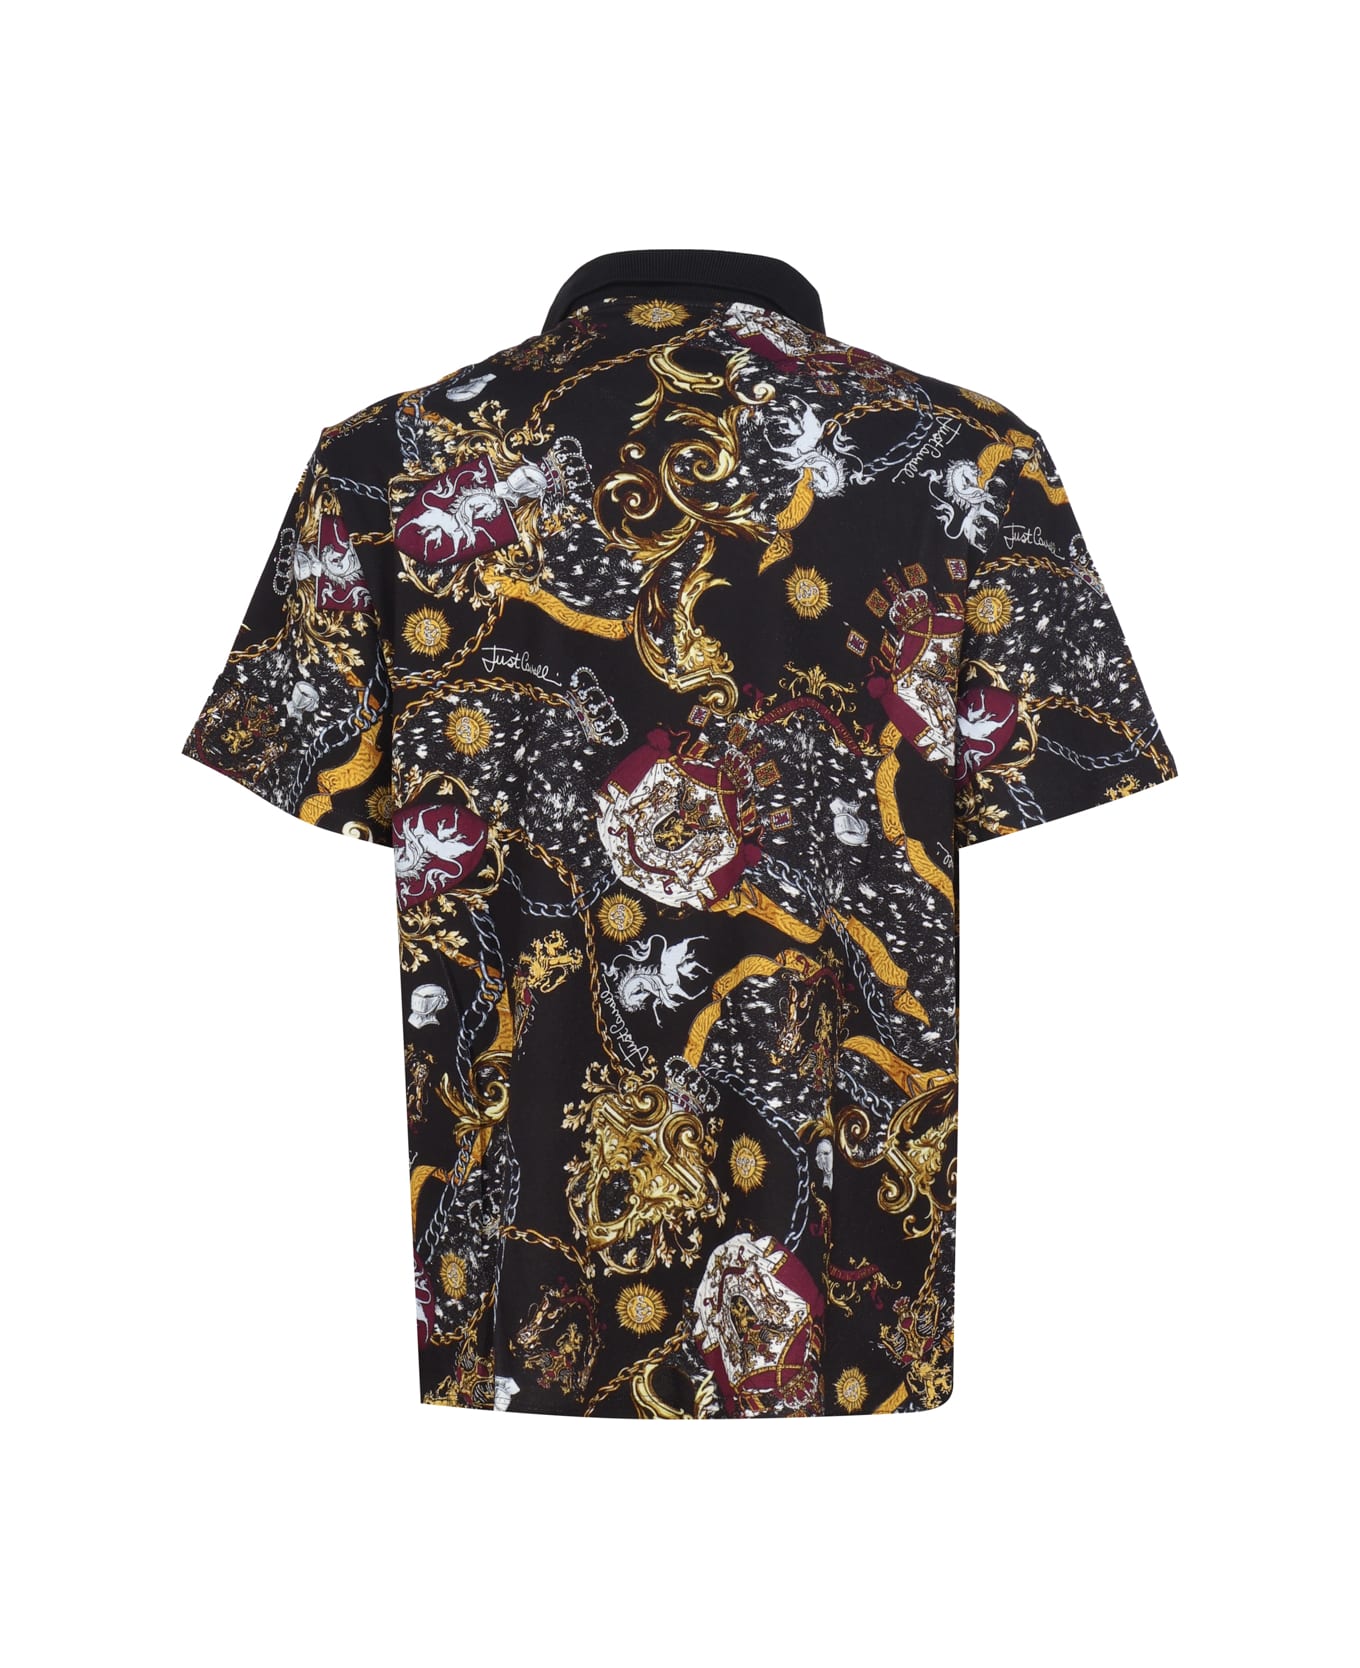 Just Cavalli Polo Shirt With Floral Print - Black